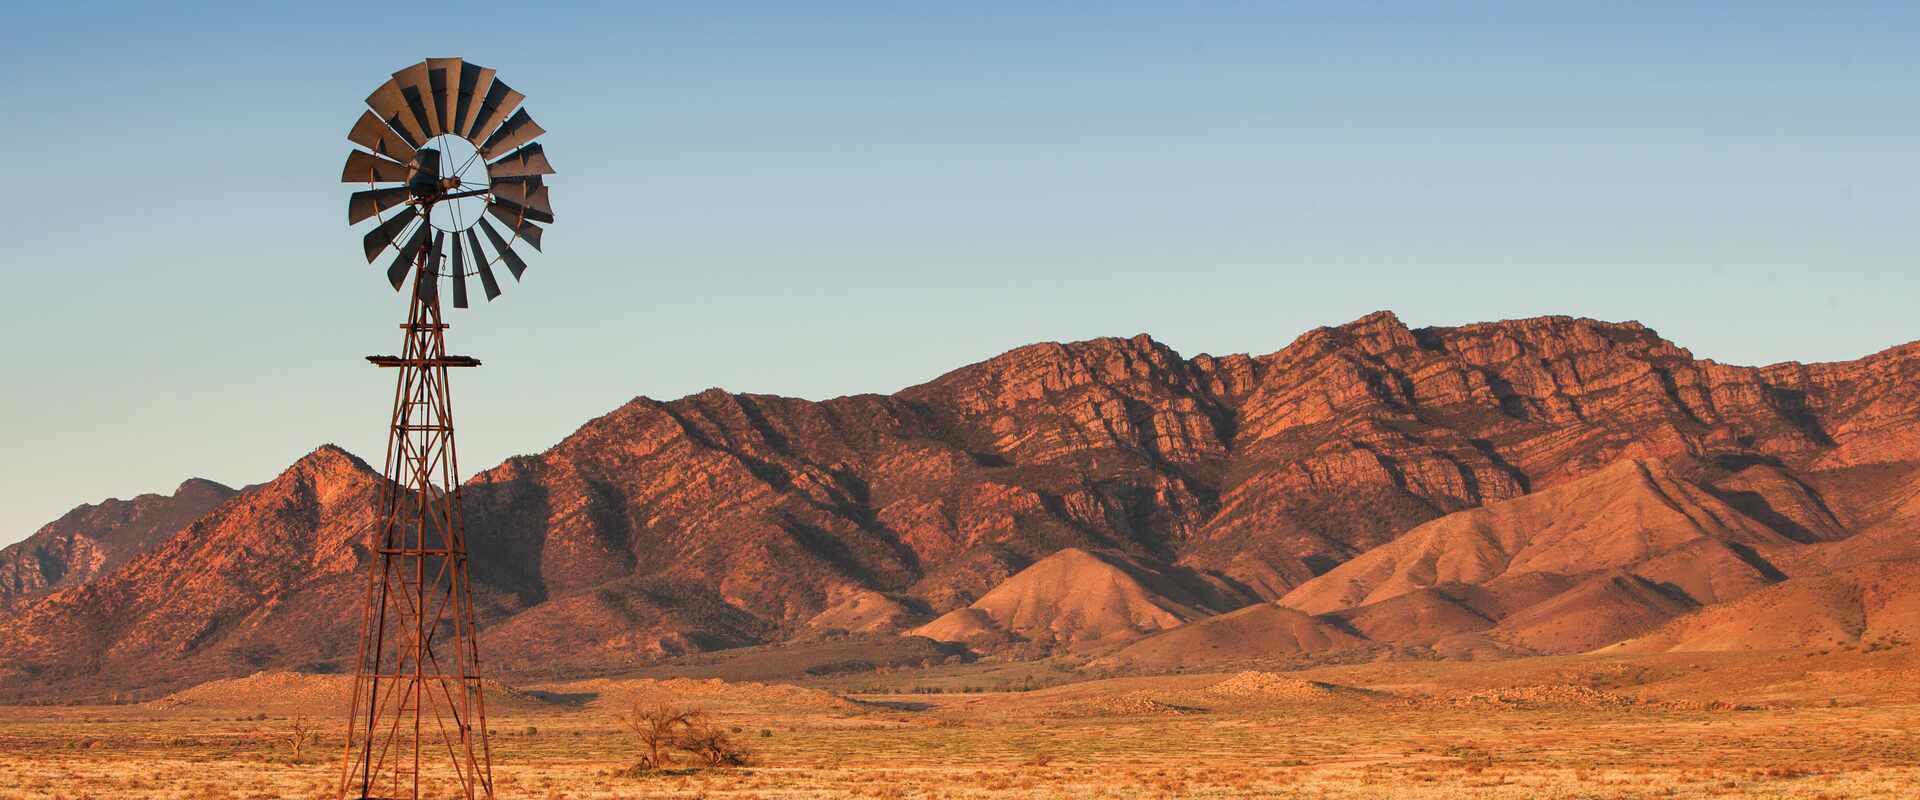 Flinders Ranges with windmill in foreground, South Australia.